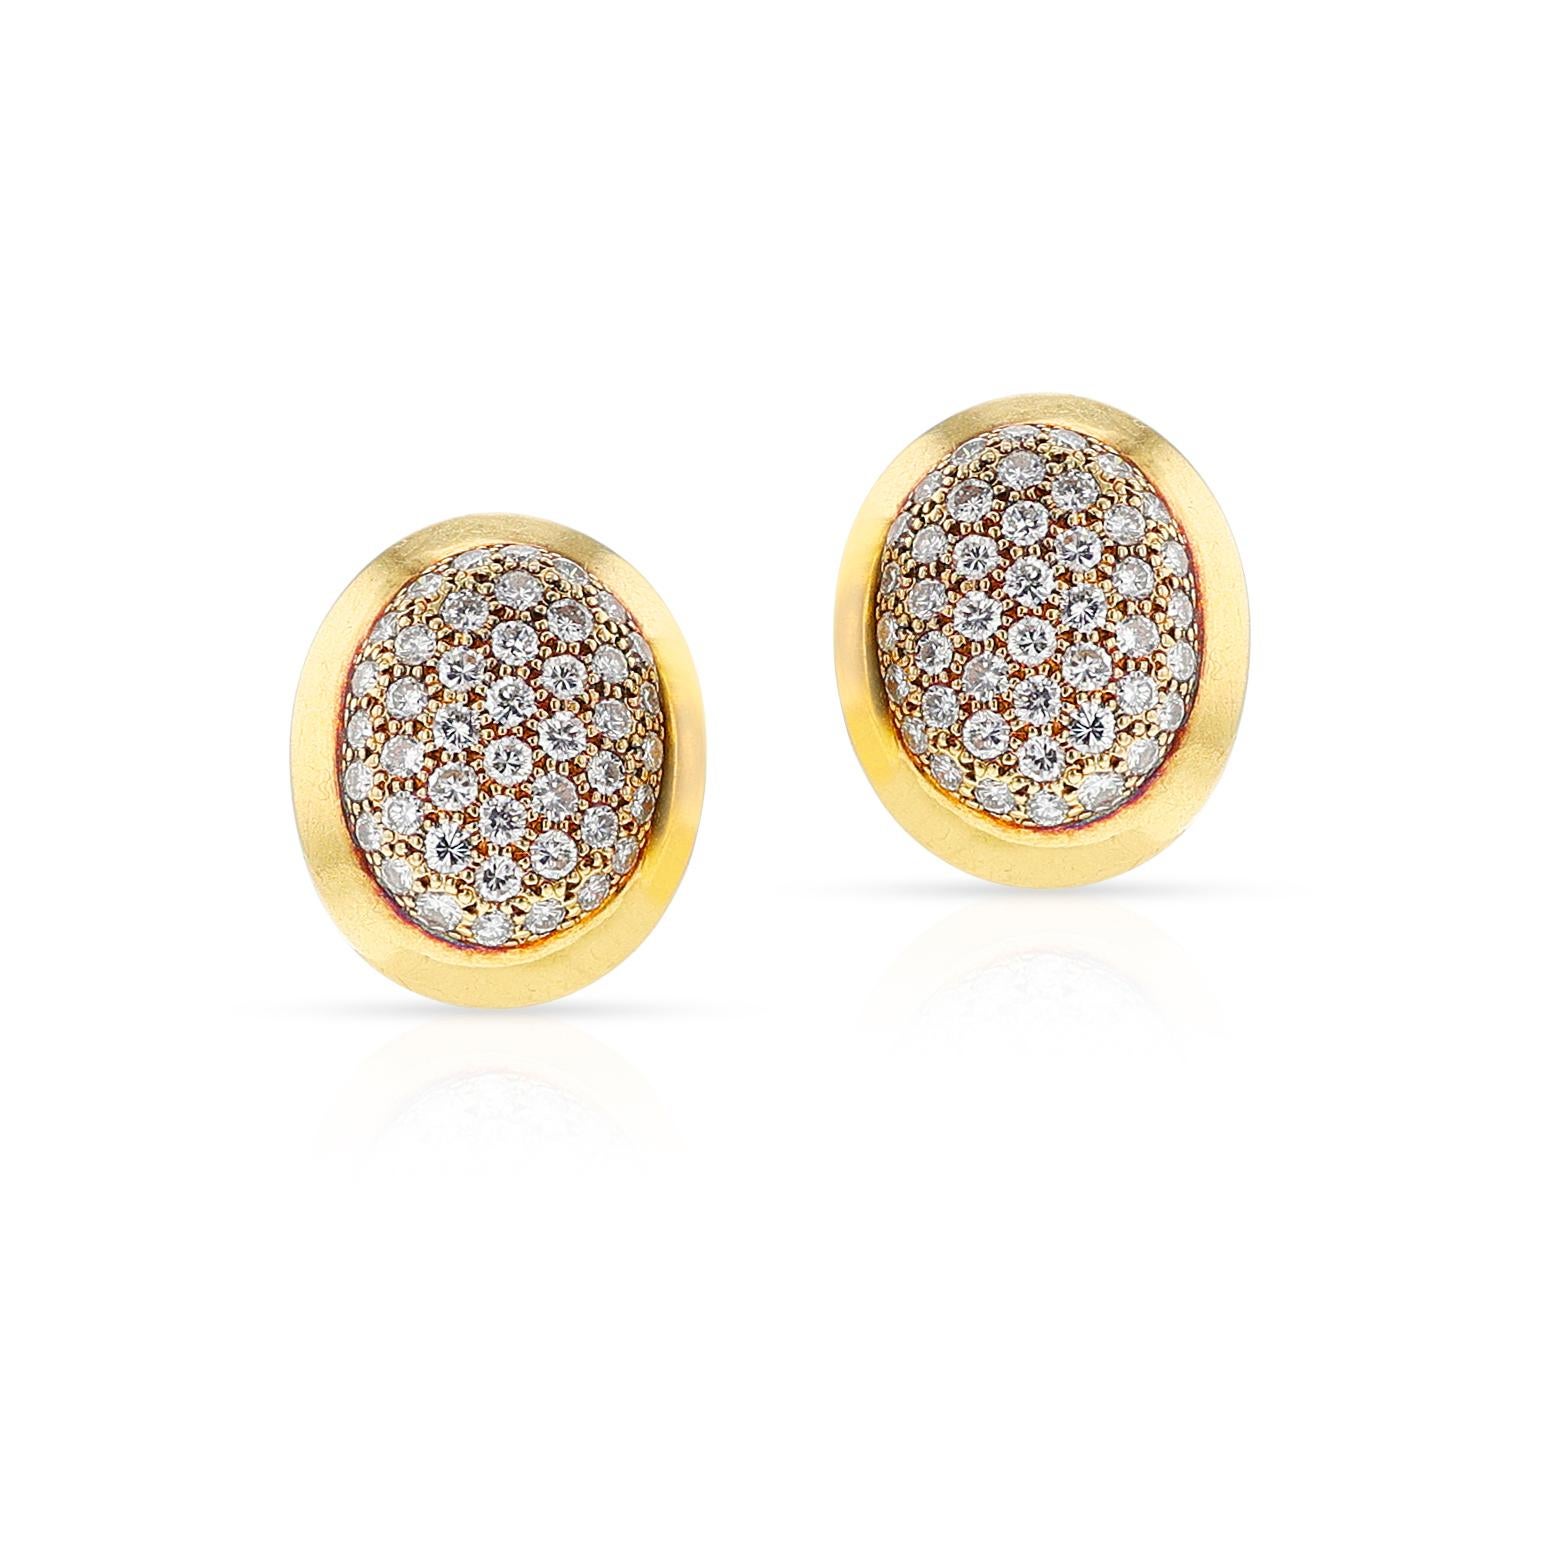 A pair of French Cartier Oval Diamond Earrings made in 18k Yellow Gold. The total weight of the diamonds is 1.80 carats. The clarity is VVS2, VS1, and Color is F/G. Signed and Numbered. French Marks. The dimensions are 0.72 inches x 0.61 inches. The